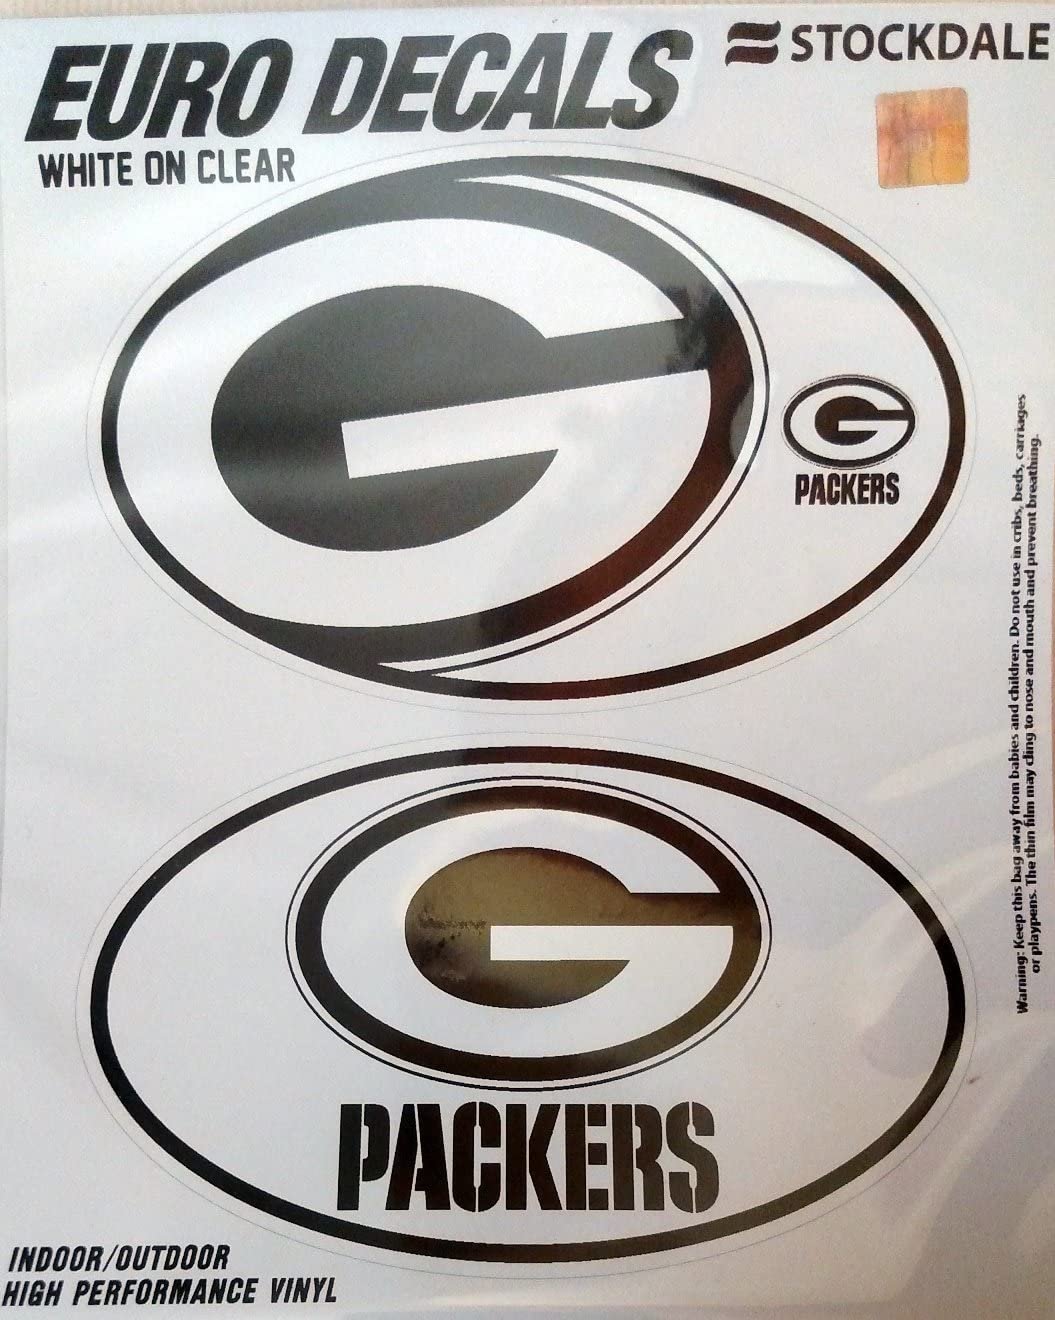 Green Bay Packers 2-Piece White and Clear Euro Decal Sticker Set, 4x2.5 Inch Each